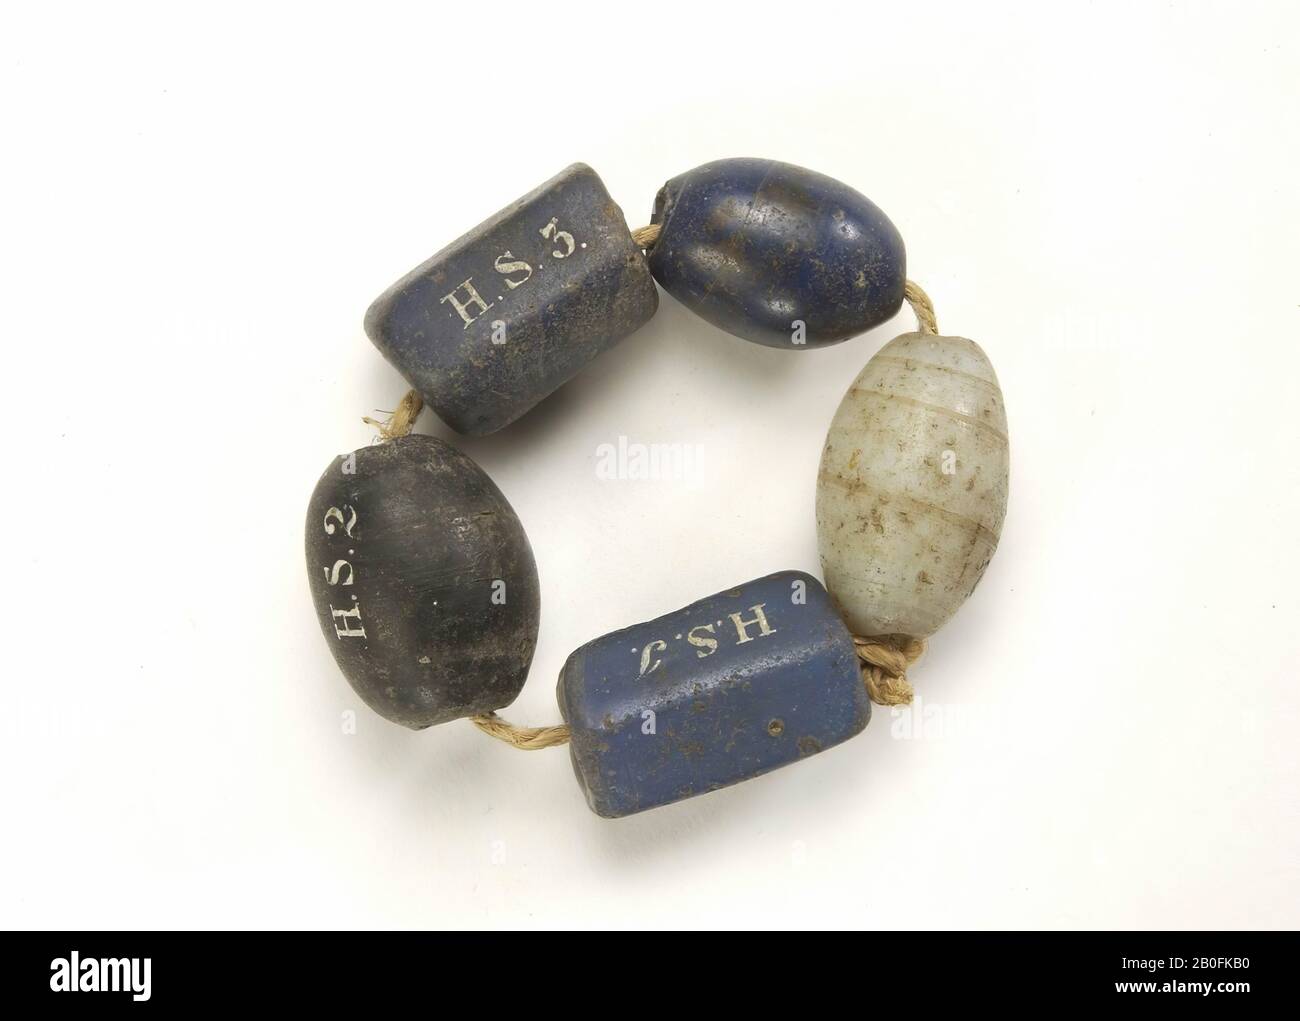 This bead belongs to the other HS No. 1-5. brand, G V 256., bead, surface, blue, glass, height: 2.4 cm, 16th-17th century 1500-1700, Netherlands, North Holland, Haarlemmermeer, Haarlemmermeer Stock Photo